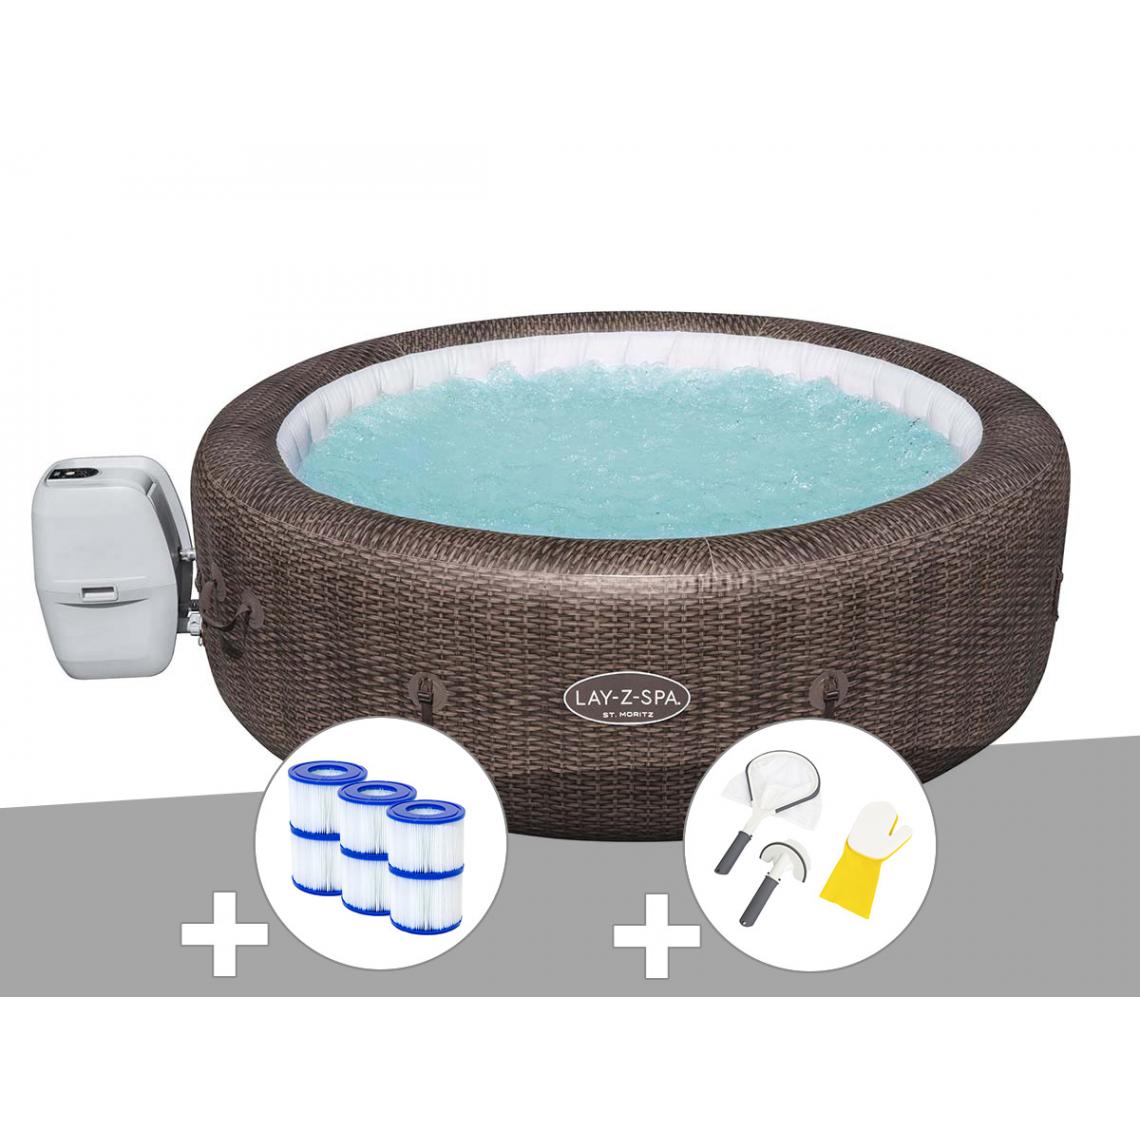 Bestway - Kit spa gonflable Bestway Lay-Z-Spa St Moritz rond Airjet 5/7 places + 6 filtres + Kit de nettoyage - Spa gonflable